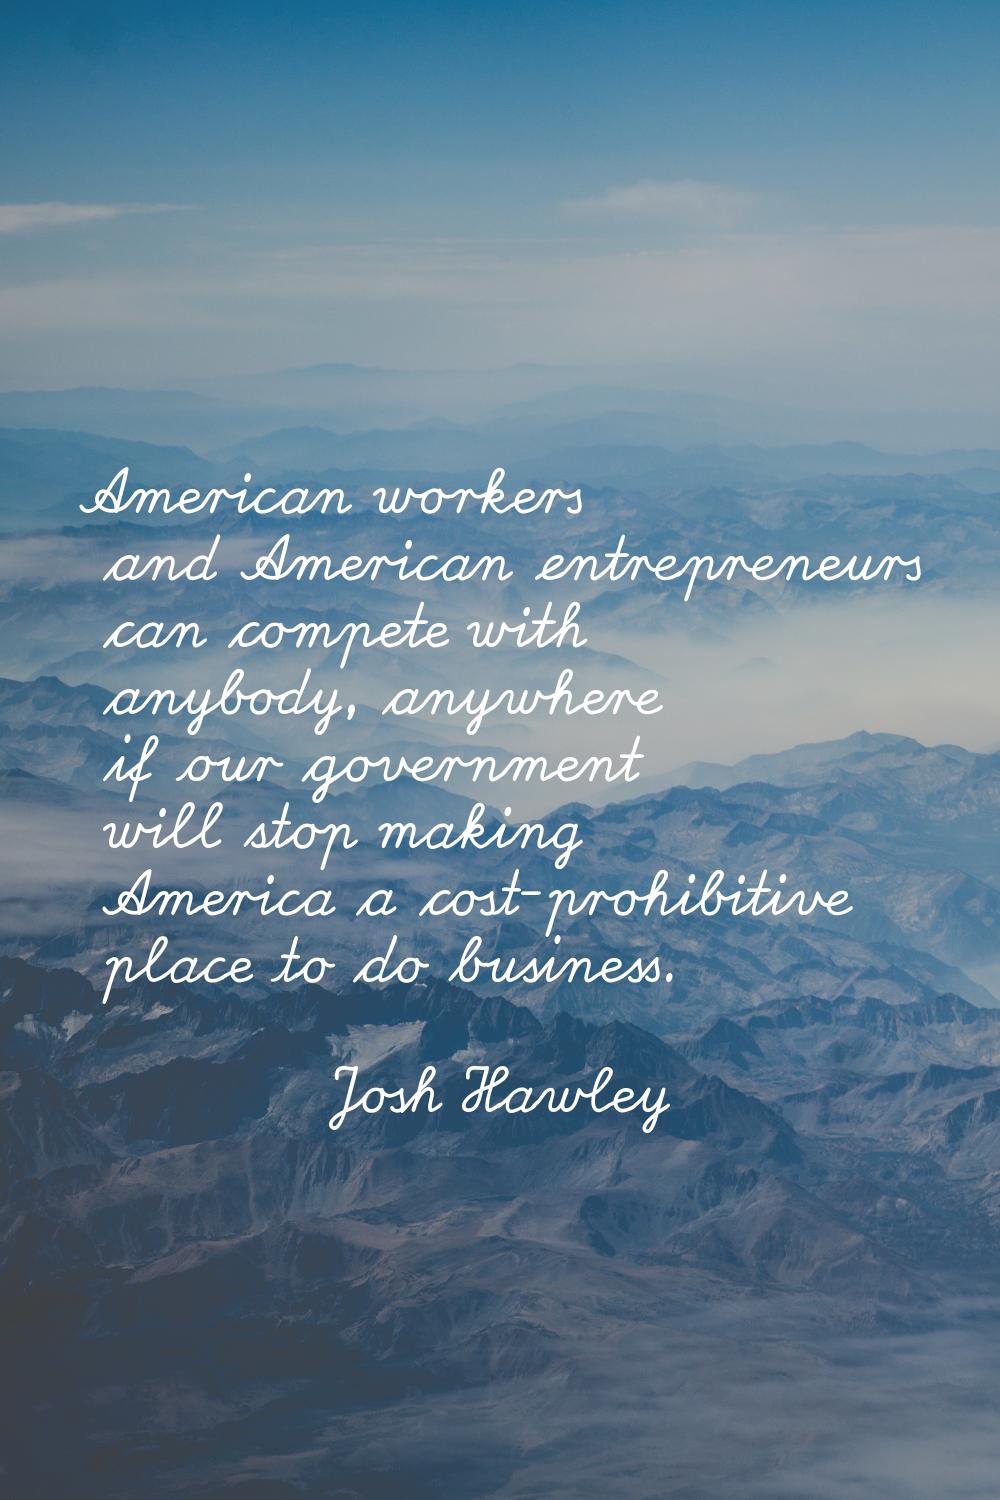 American workers and American entrepreneurs can compete with anybody, anywhere if our government wi